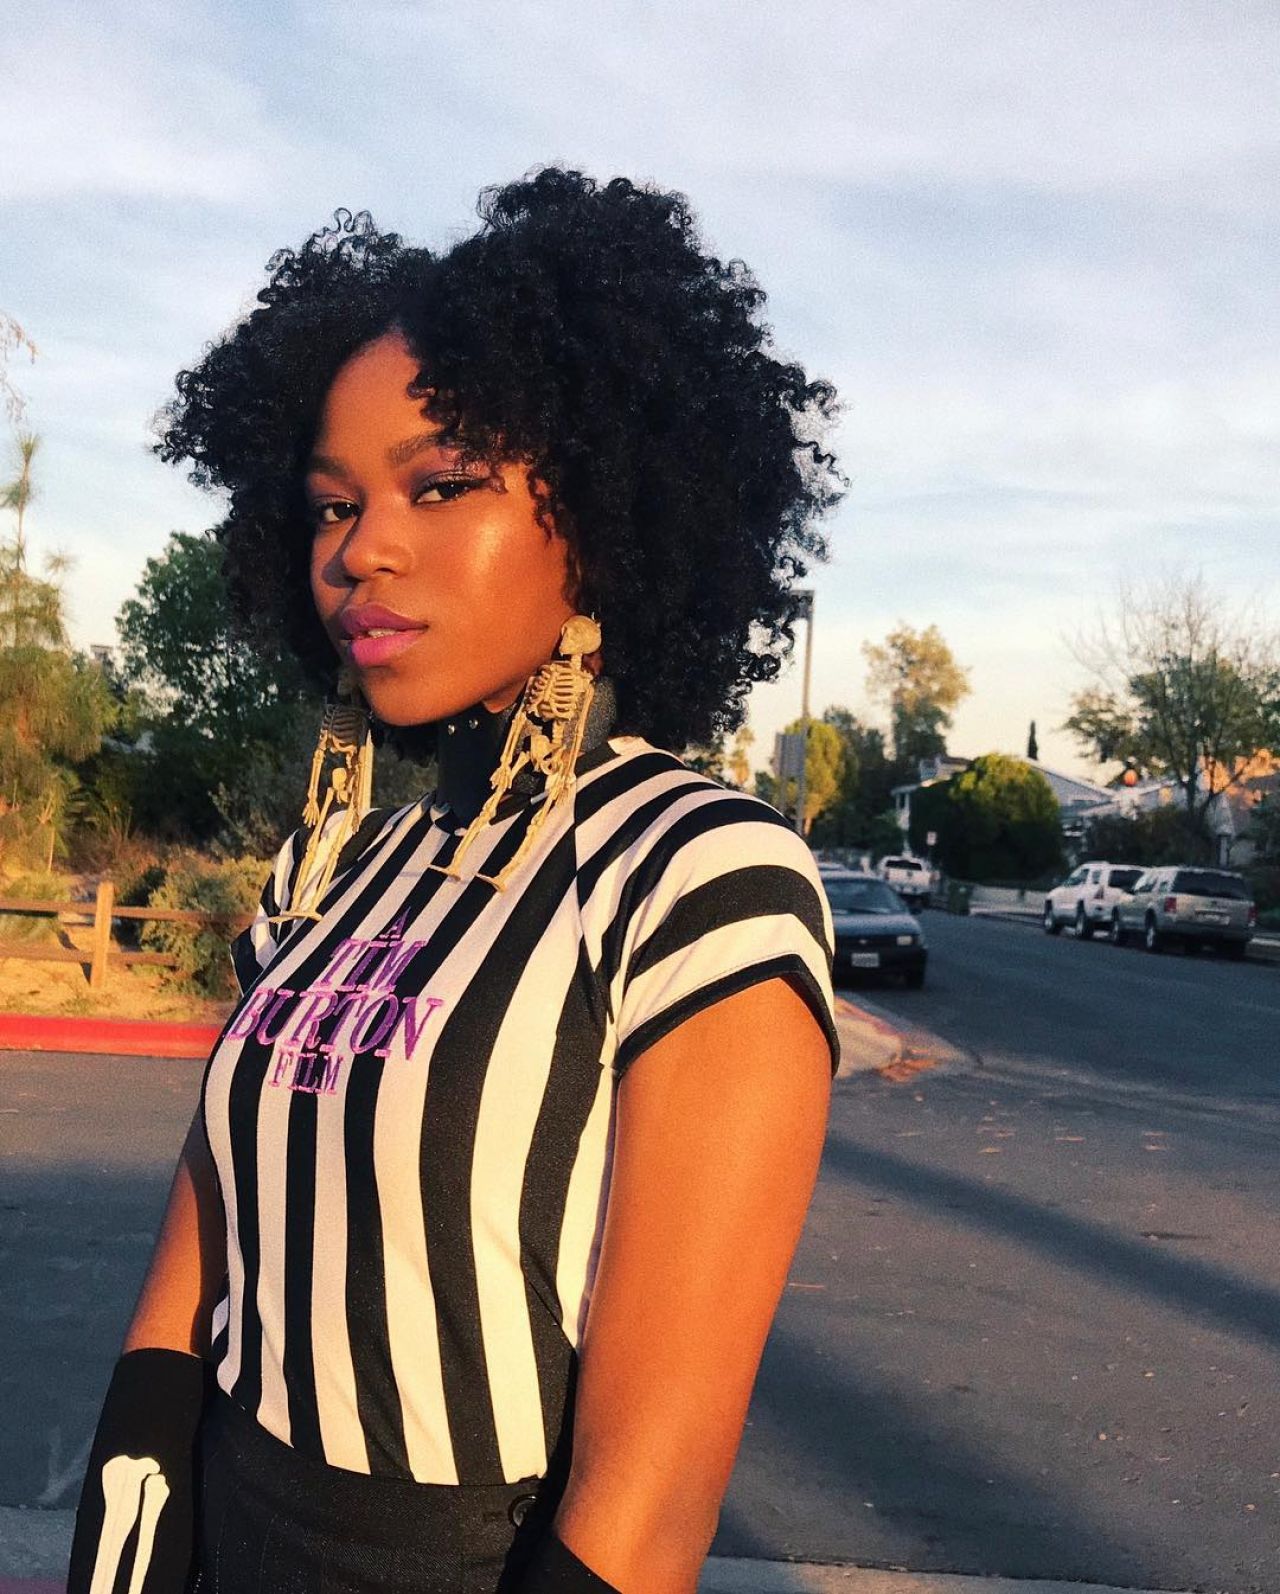 Riele Downs - Personal Pics 01/24/2019.